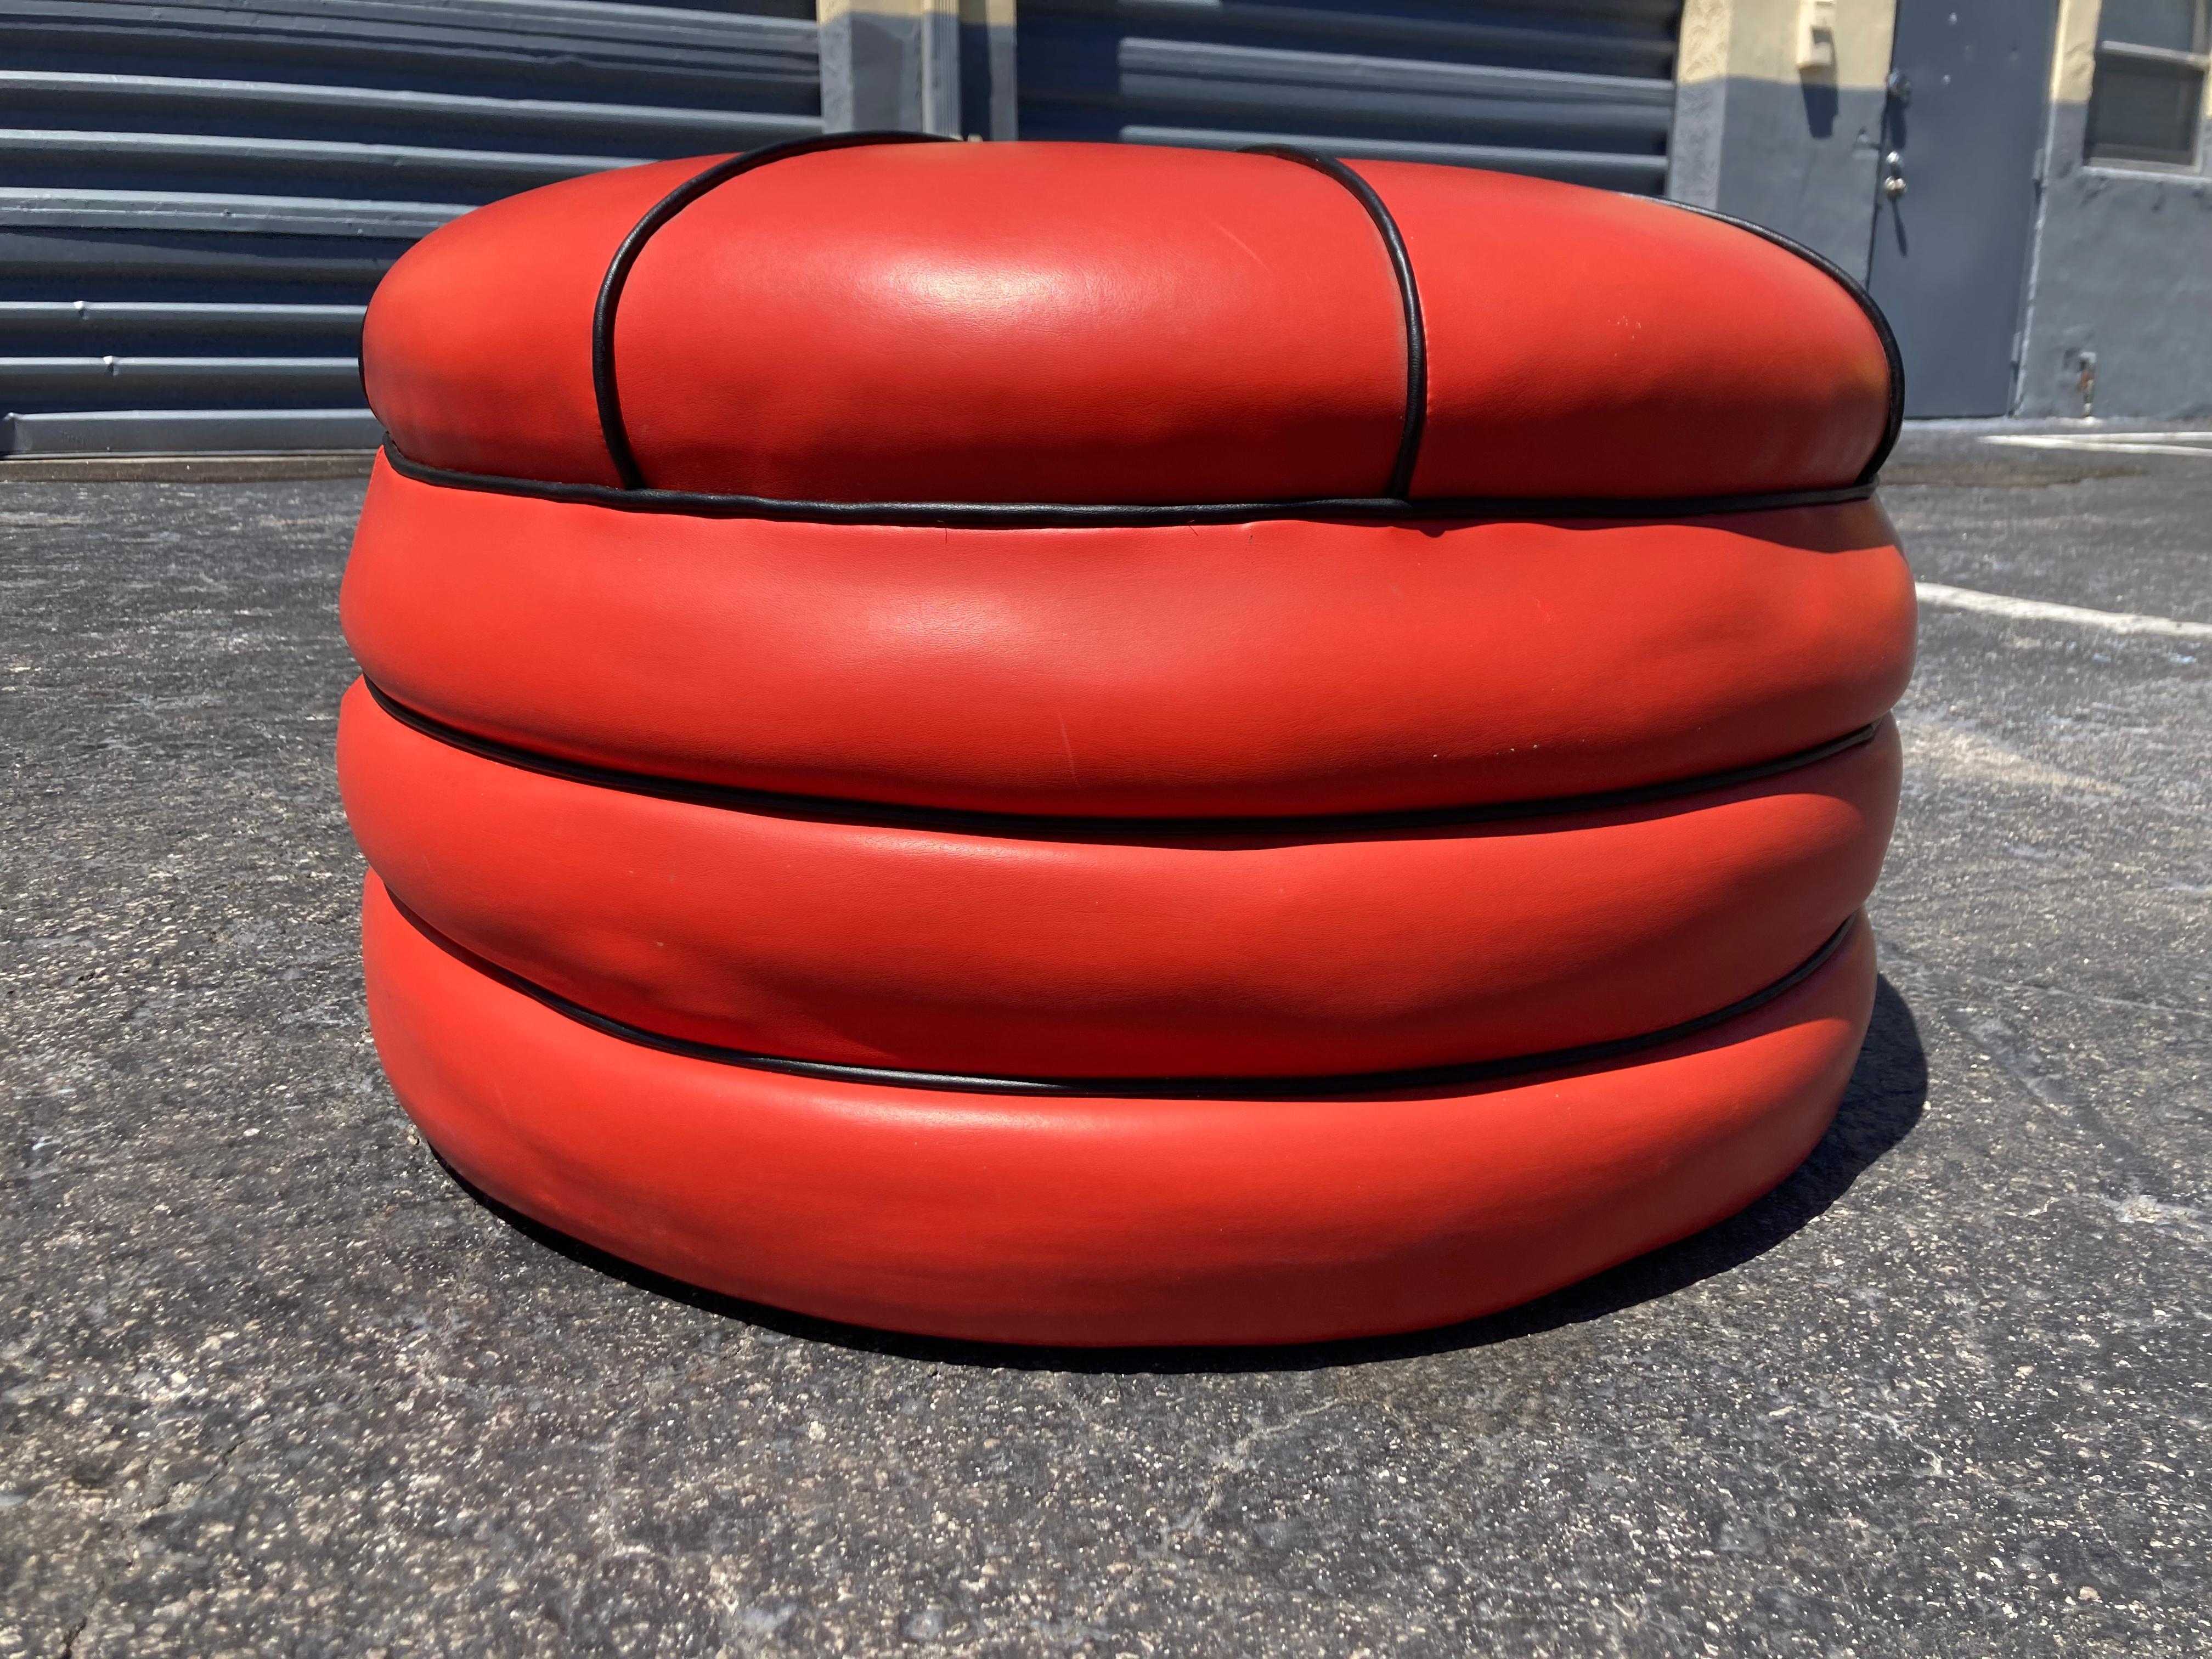 red pouffe